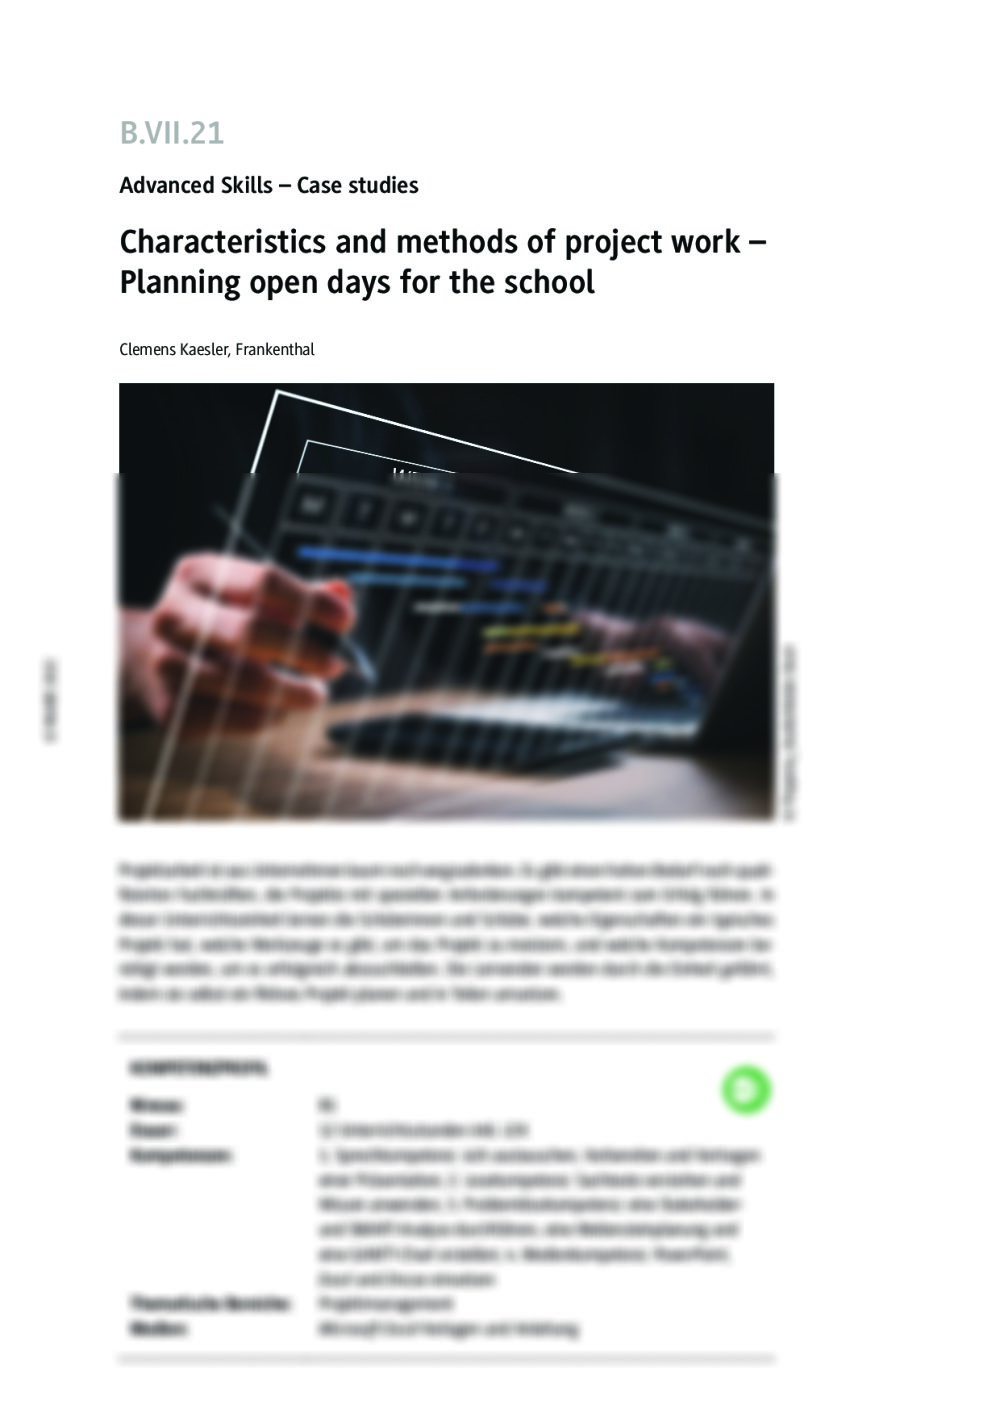 Characteristics and methods of project work - Seite 1